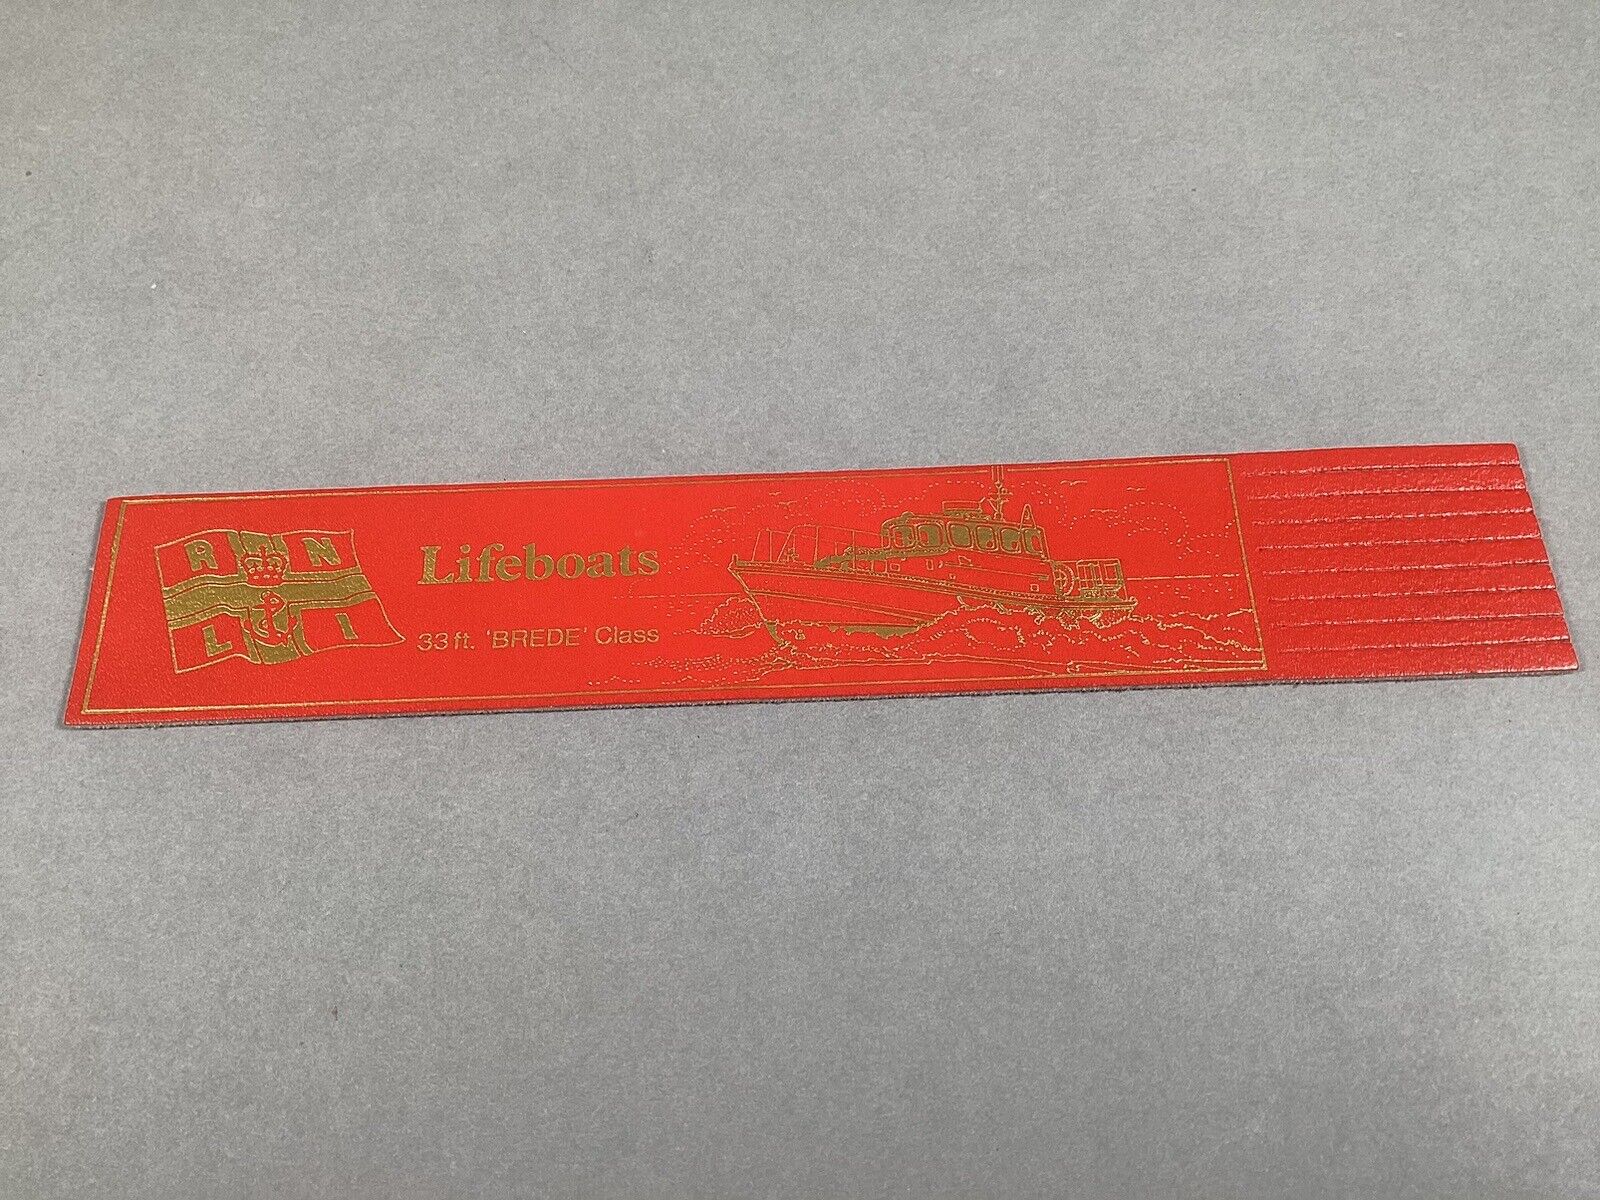 Lifeboats 33ft ‘Breda’ Class Bookmark - Red Leather With Gold Detail